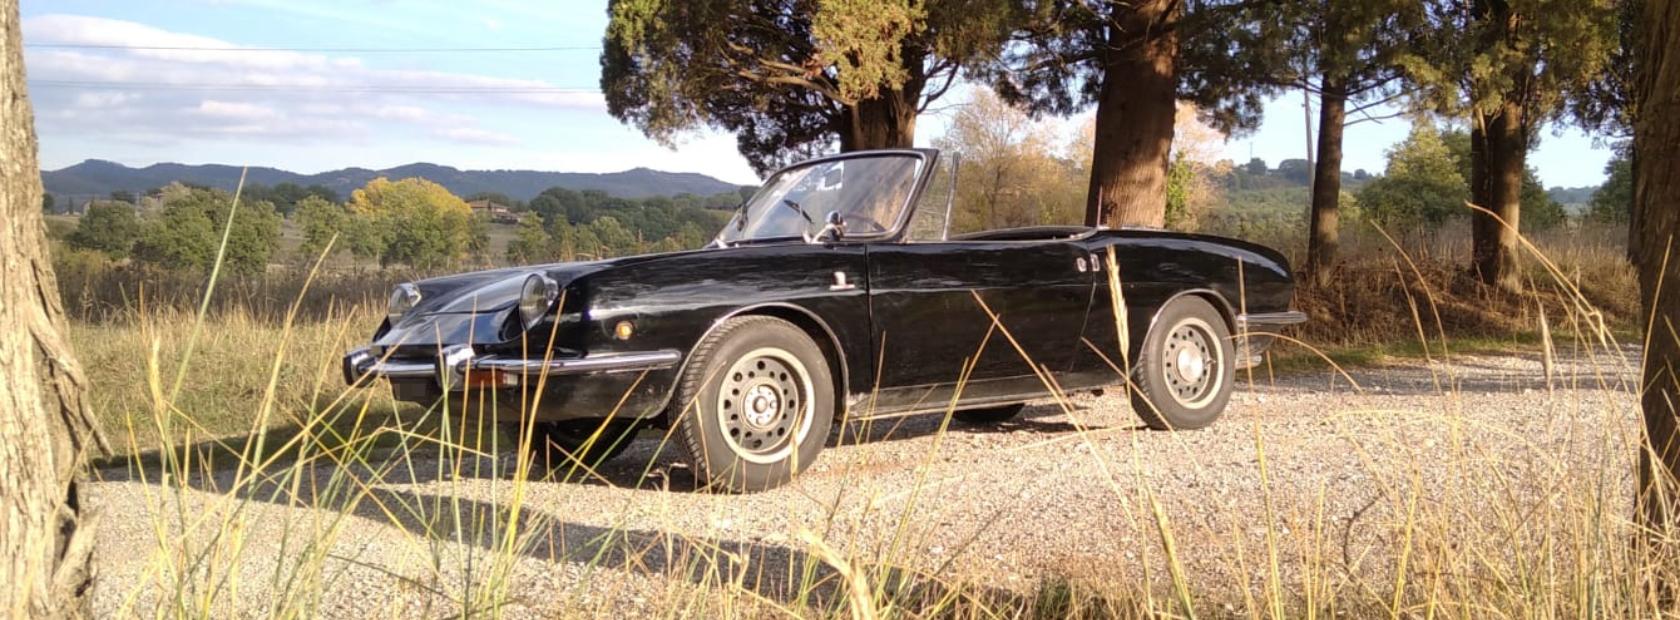 Fiat 850 spider sport - Our vintage cars for rent in central Italy